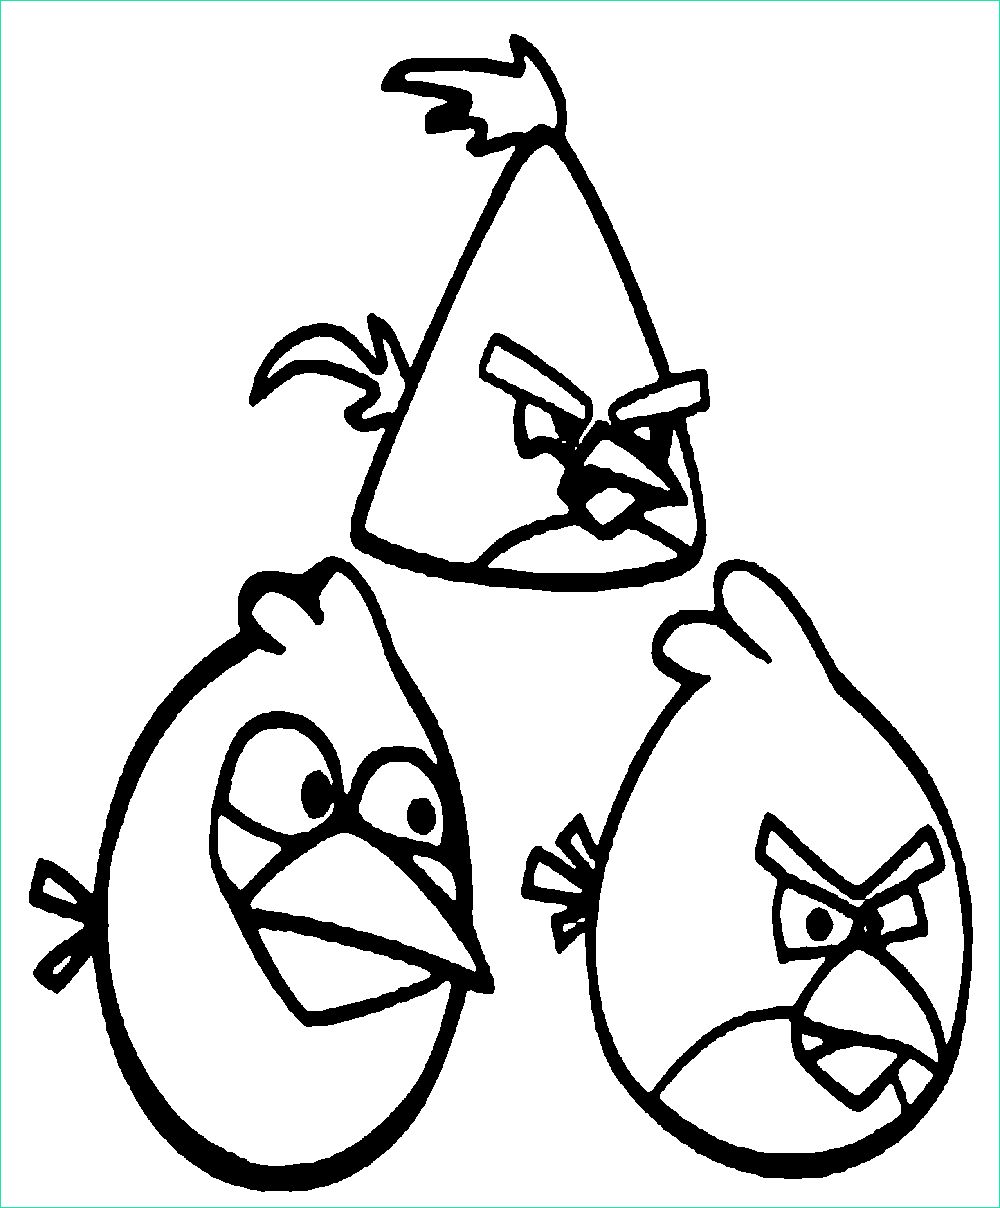 Coloriage Angry Birds Bestof Images Angry Birds 10 Coloriage Angry Birds Coloriages Pour